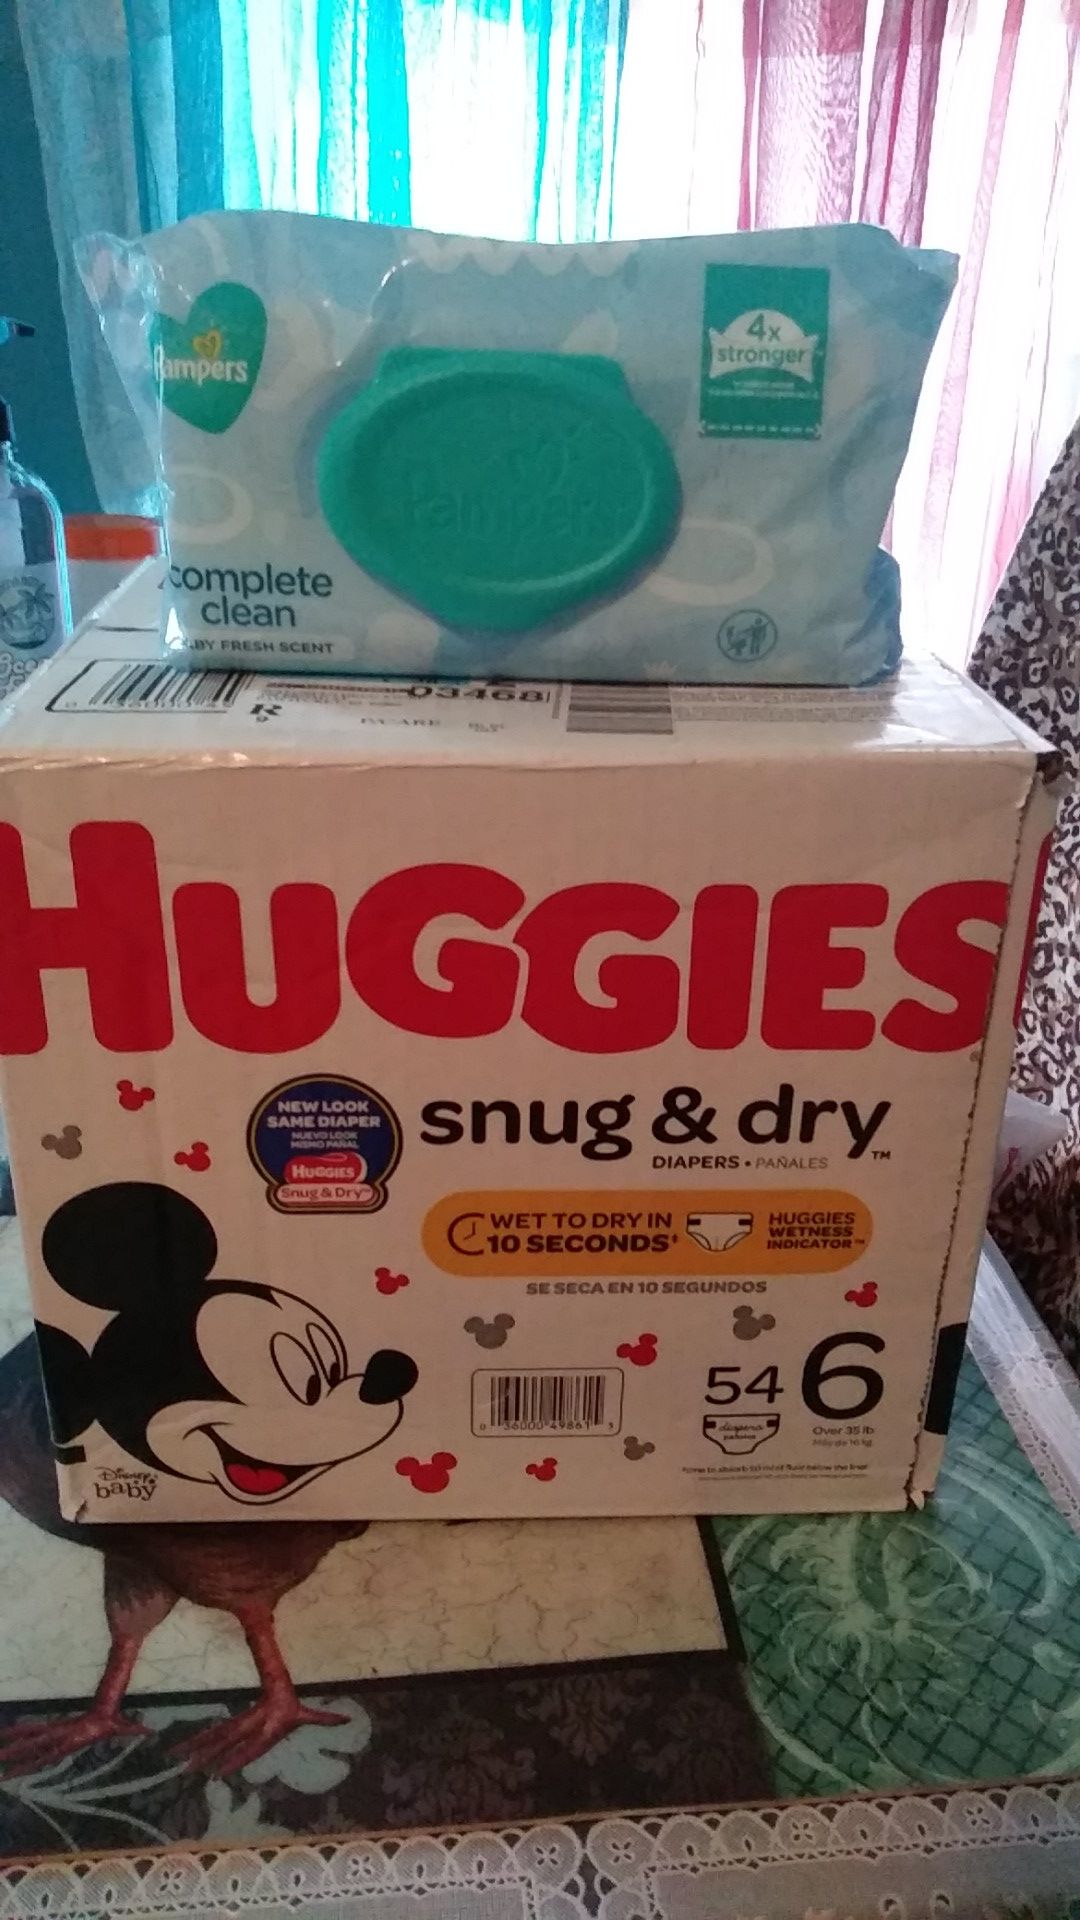 1 Box HUGGIES Snug&dry 54 Diapers size 6 With pampers wipes 72